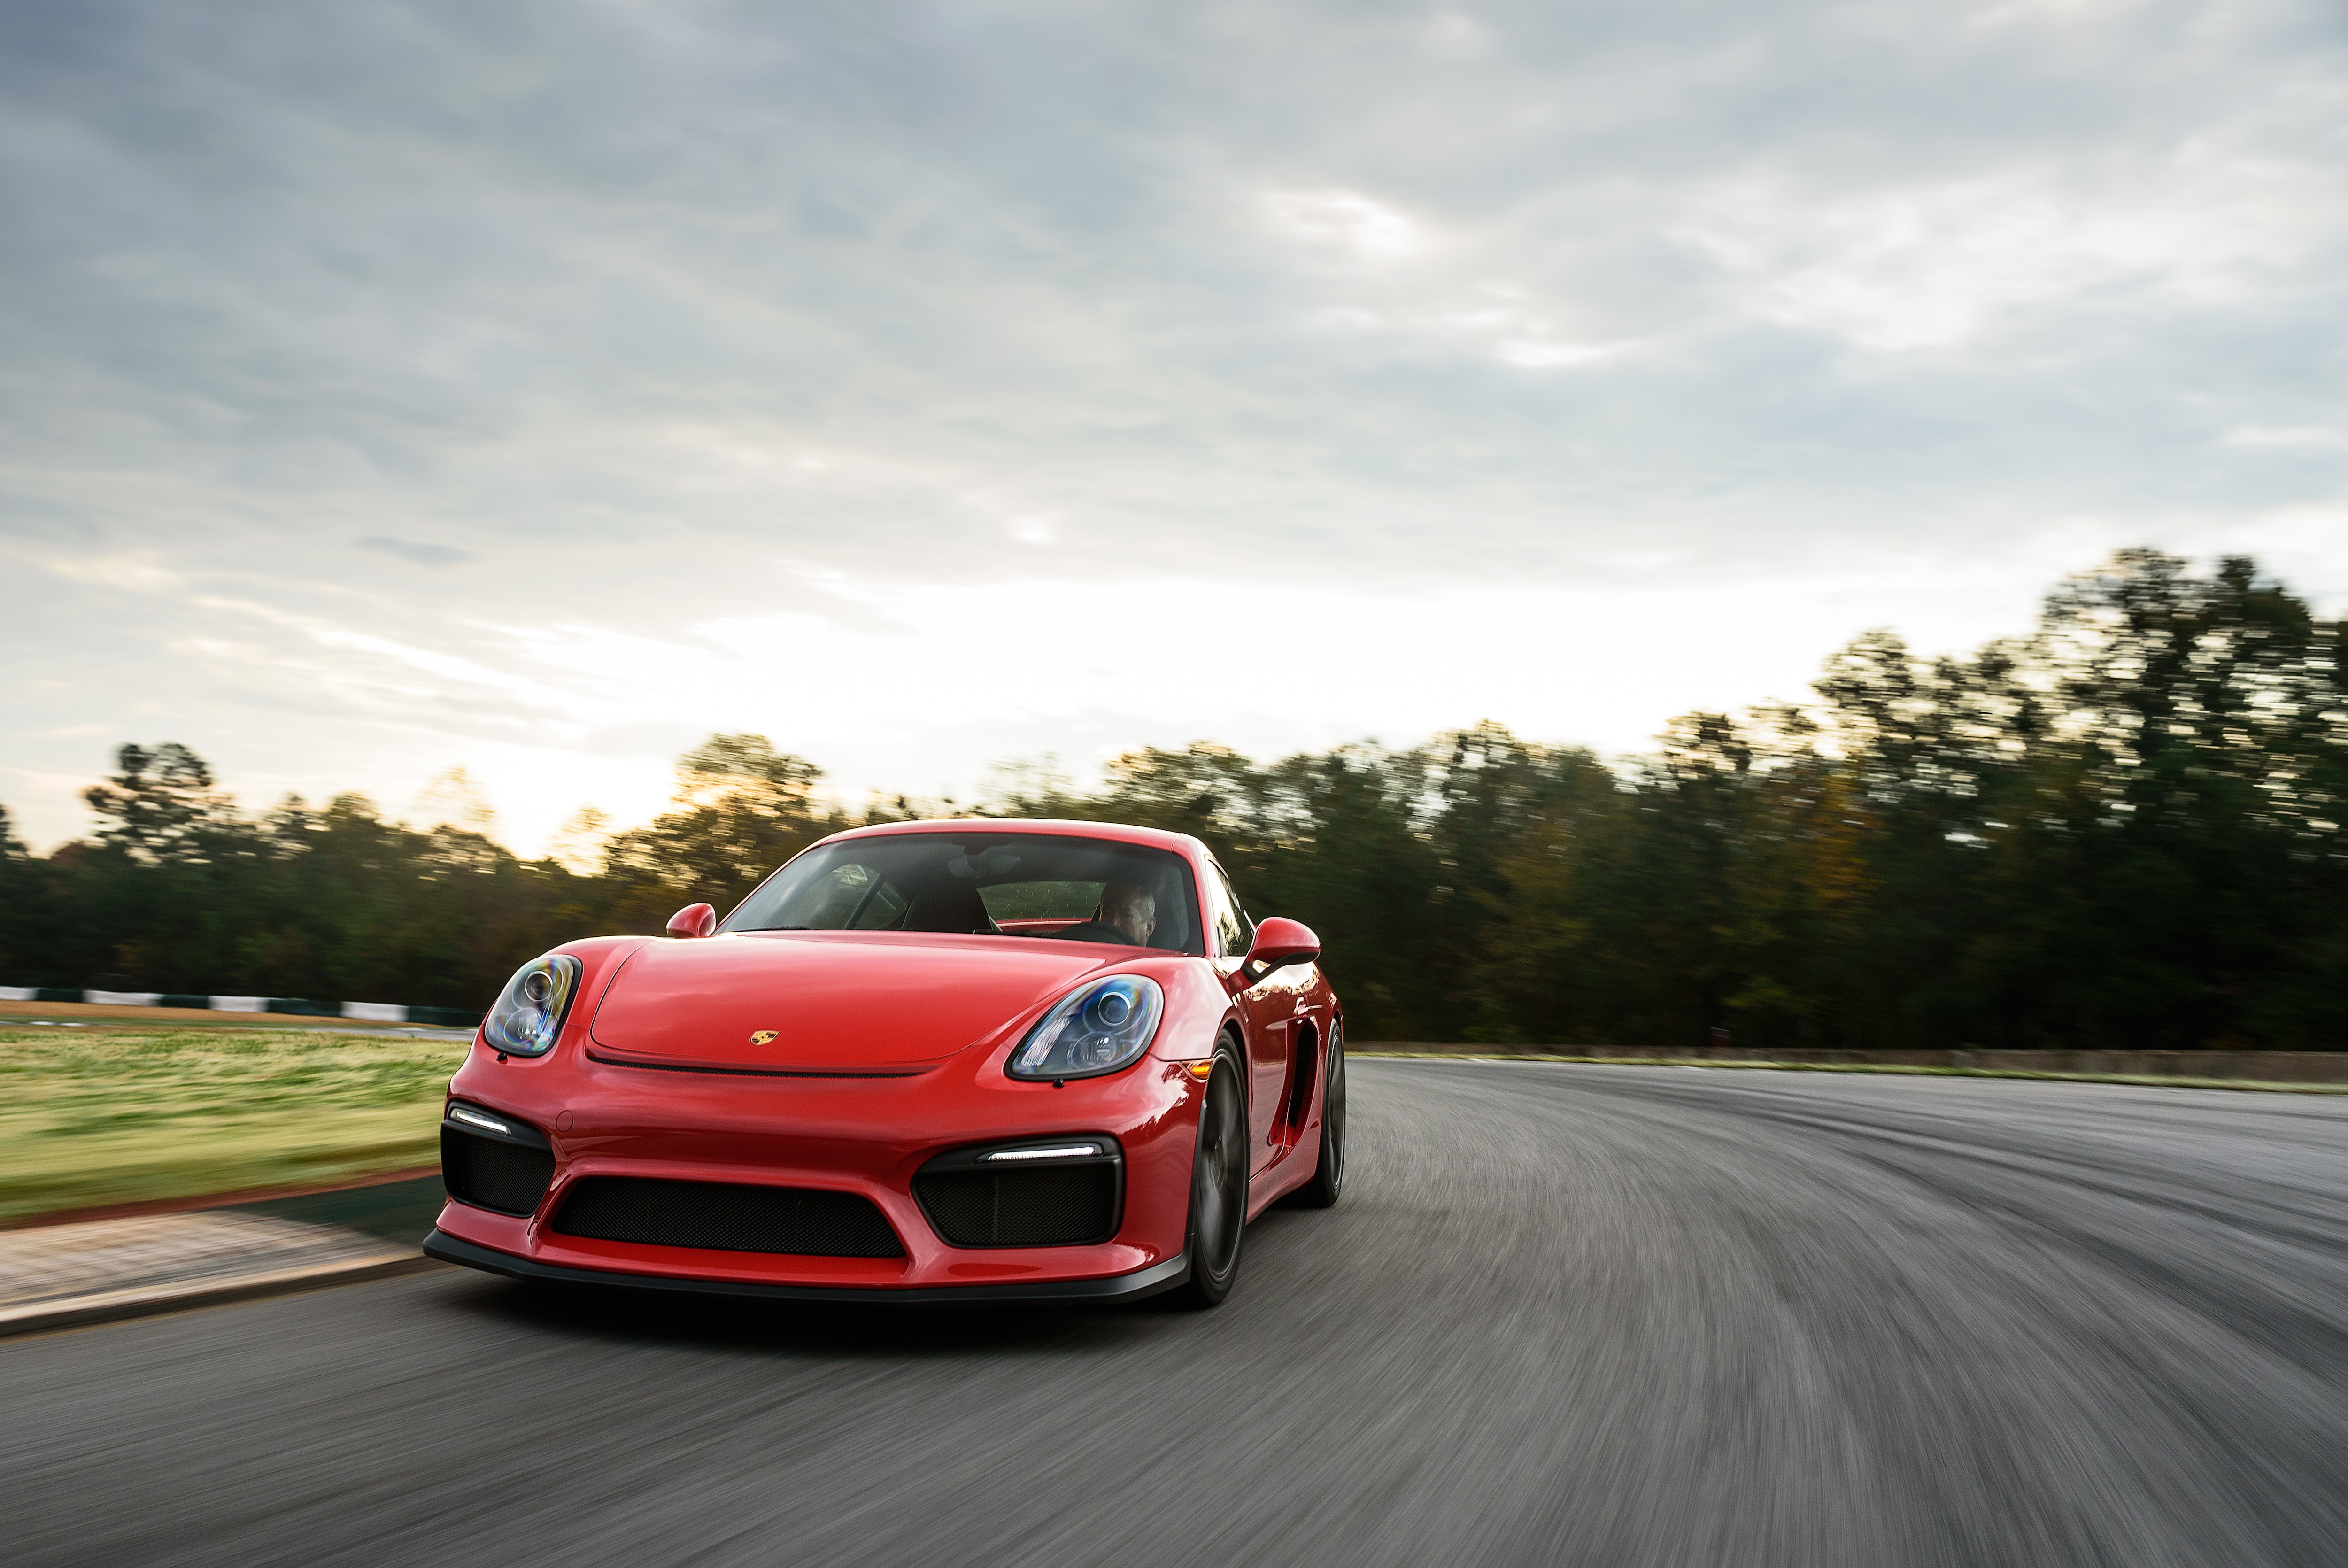 Porsche Cayman Wallpapers - Rev Up Your Screens with Stunning Car ...